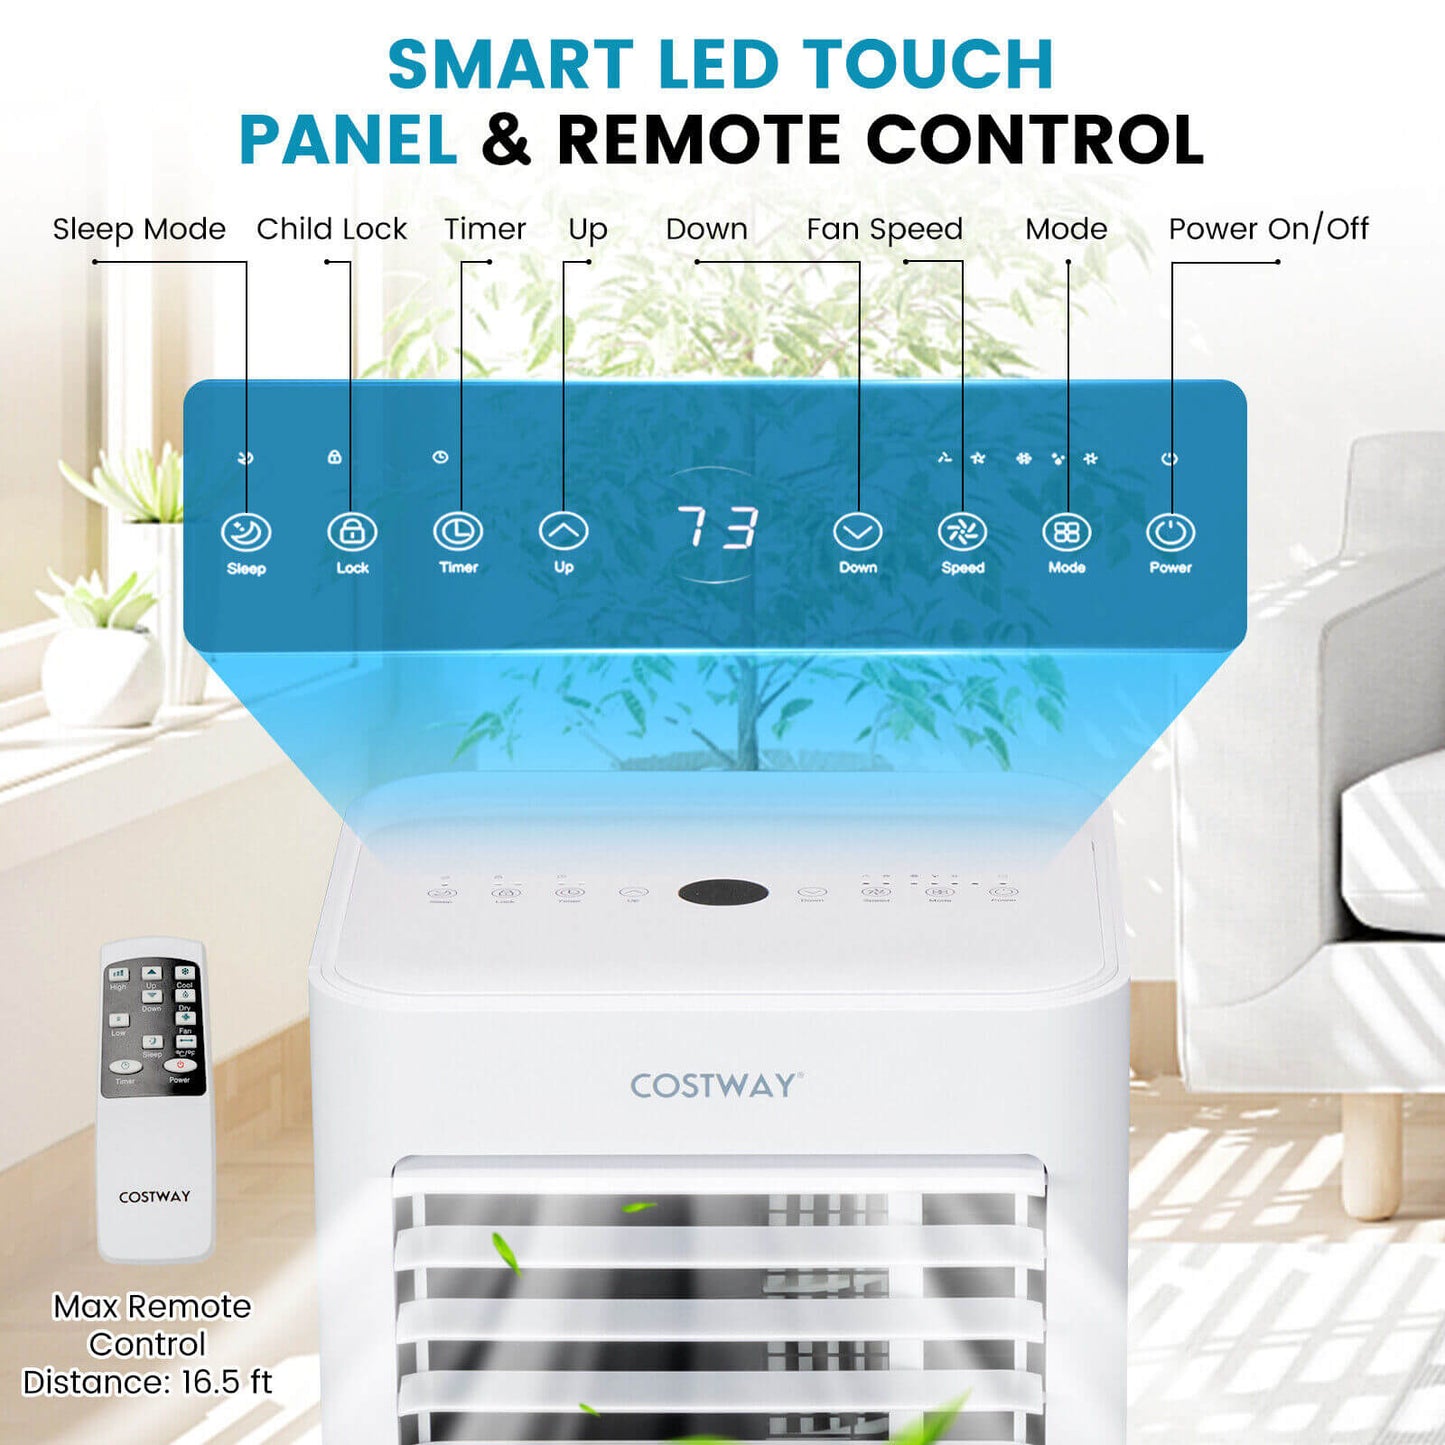 4-in-1 8000 BTU Air Conditioner with Cool Fan Dehumidifier and Sleep Mode, White